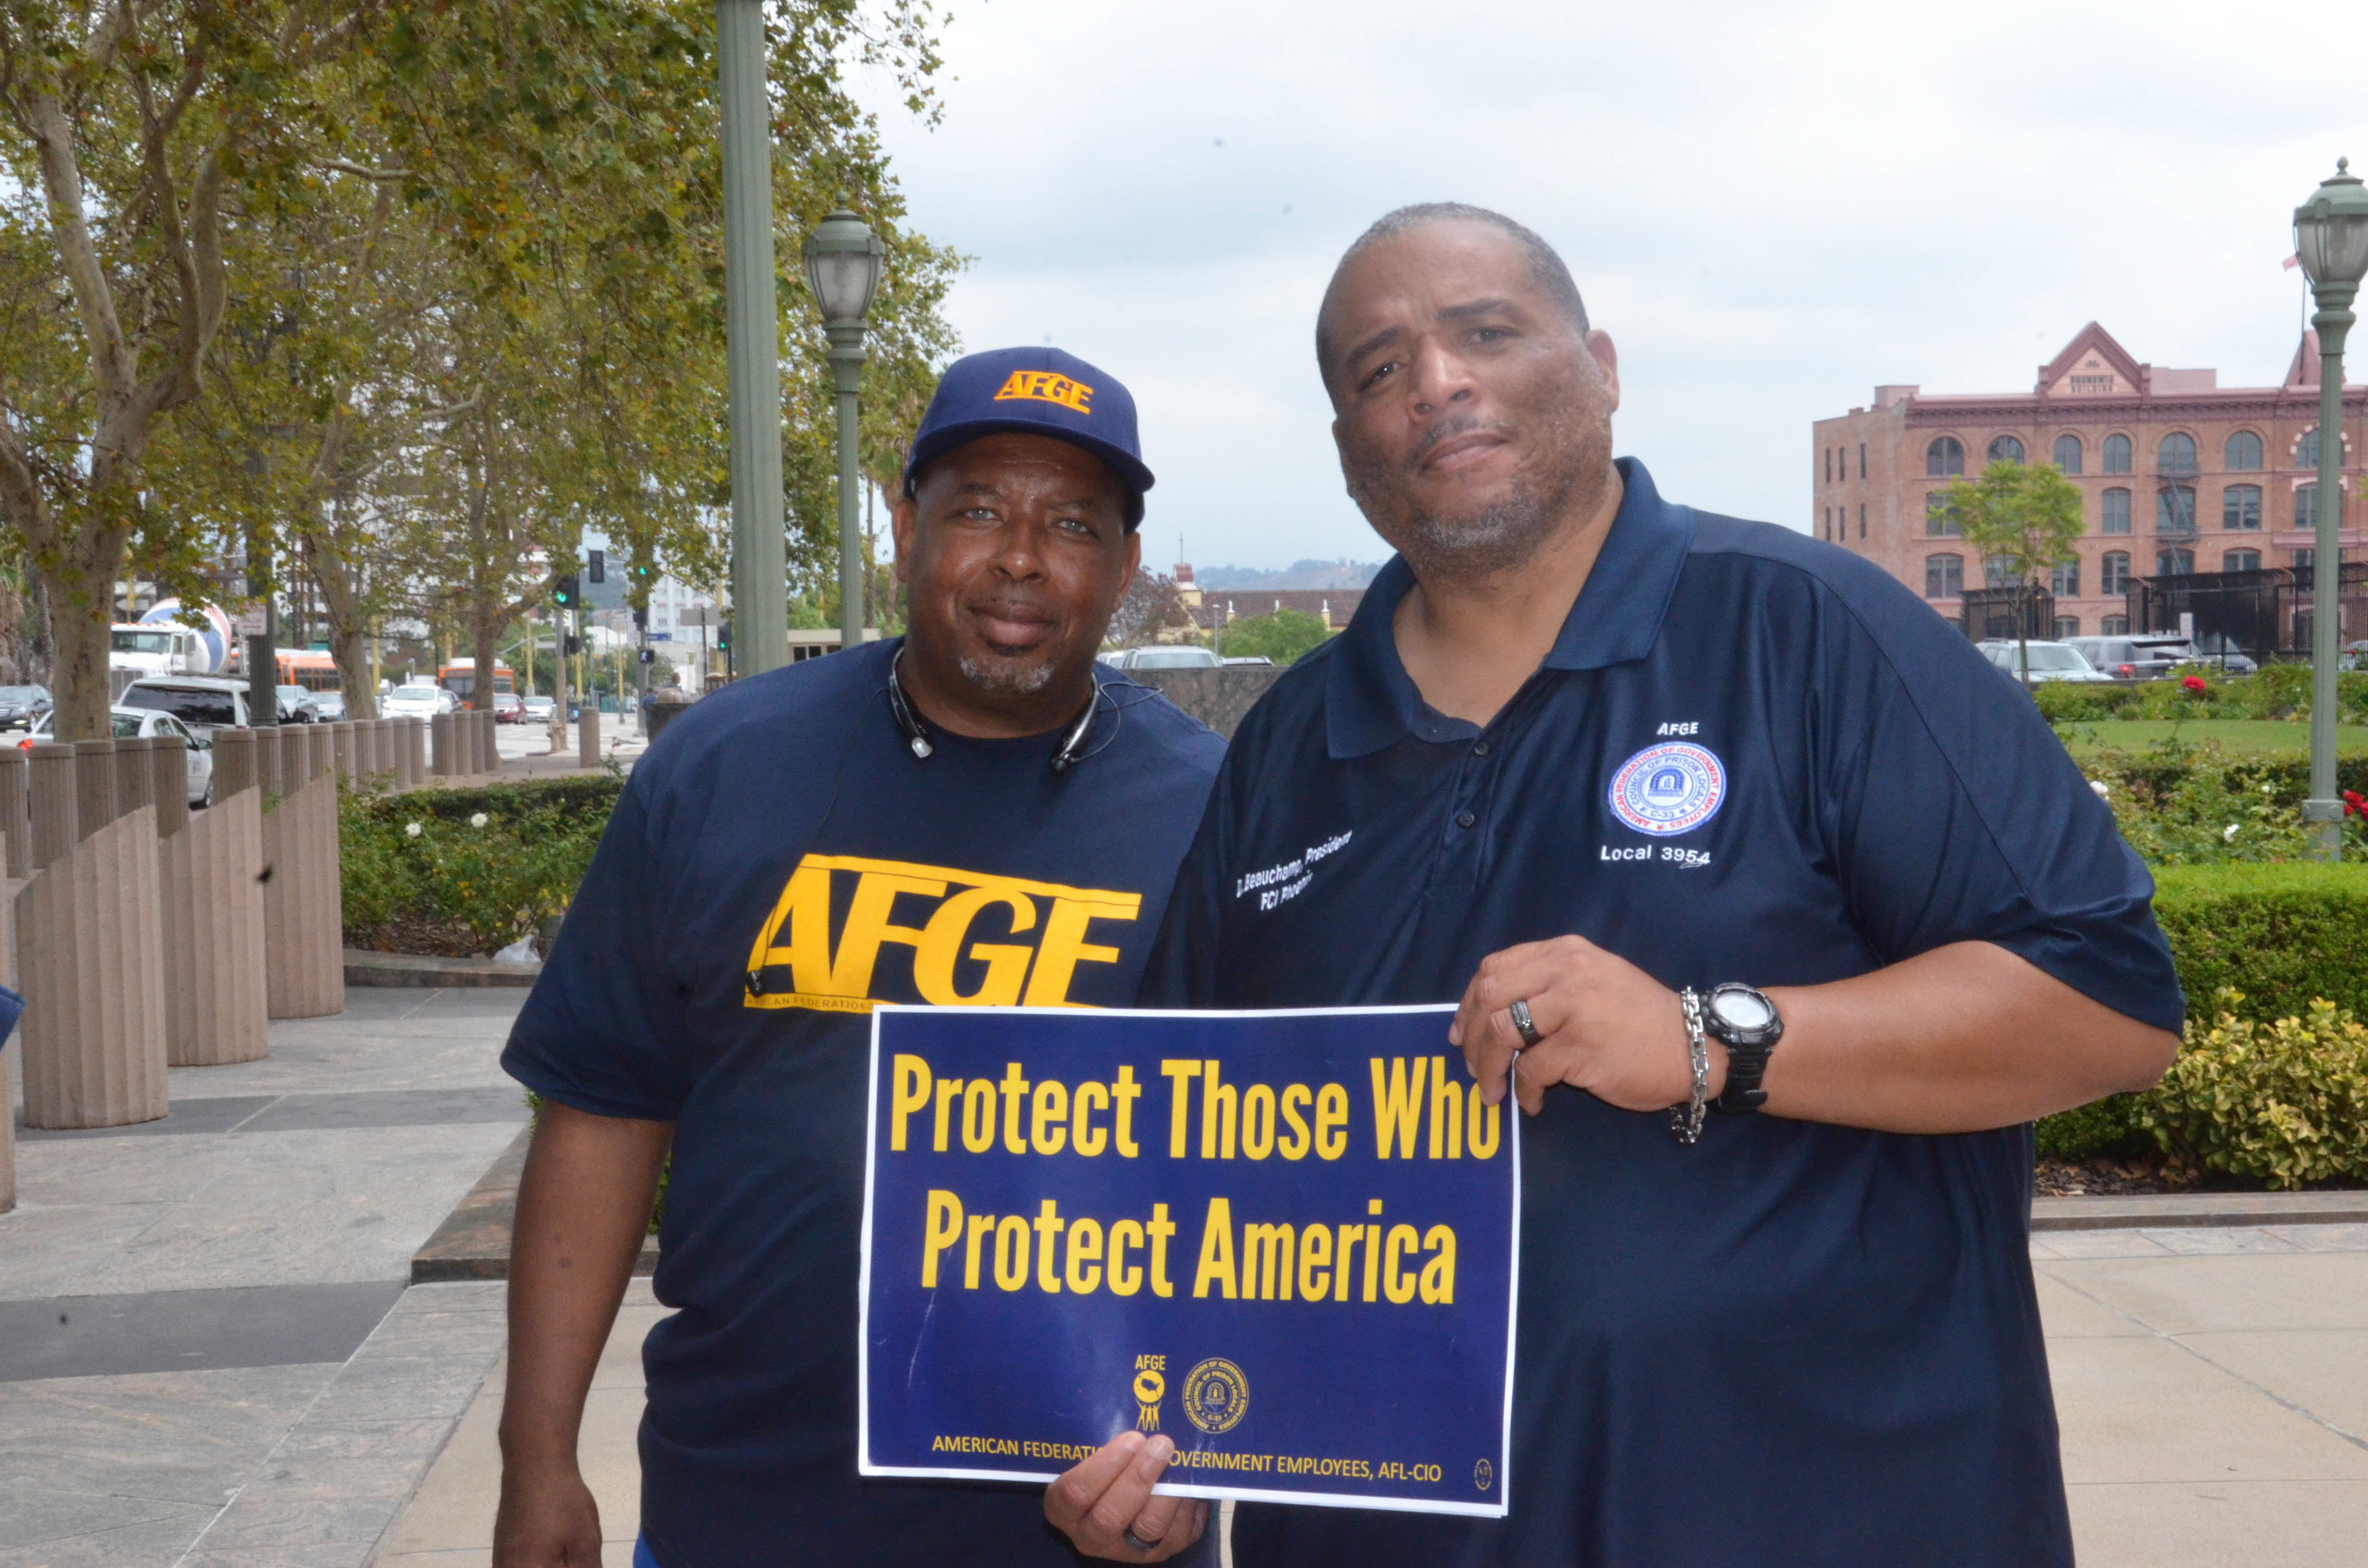 AFGE Council of Prison Locals hails announcement as move towards safe, responsible incarceration policy.